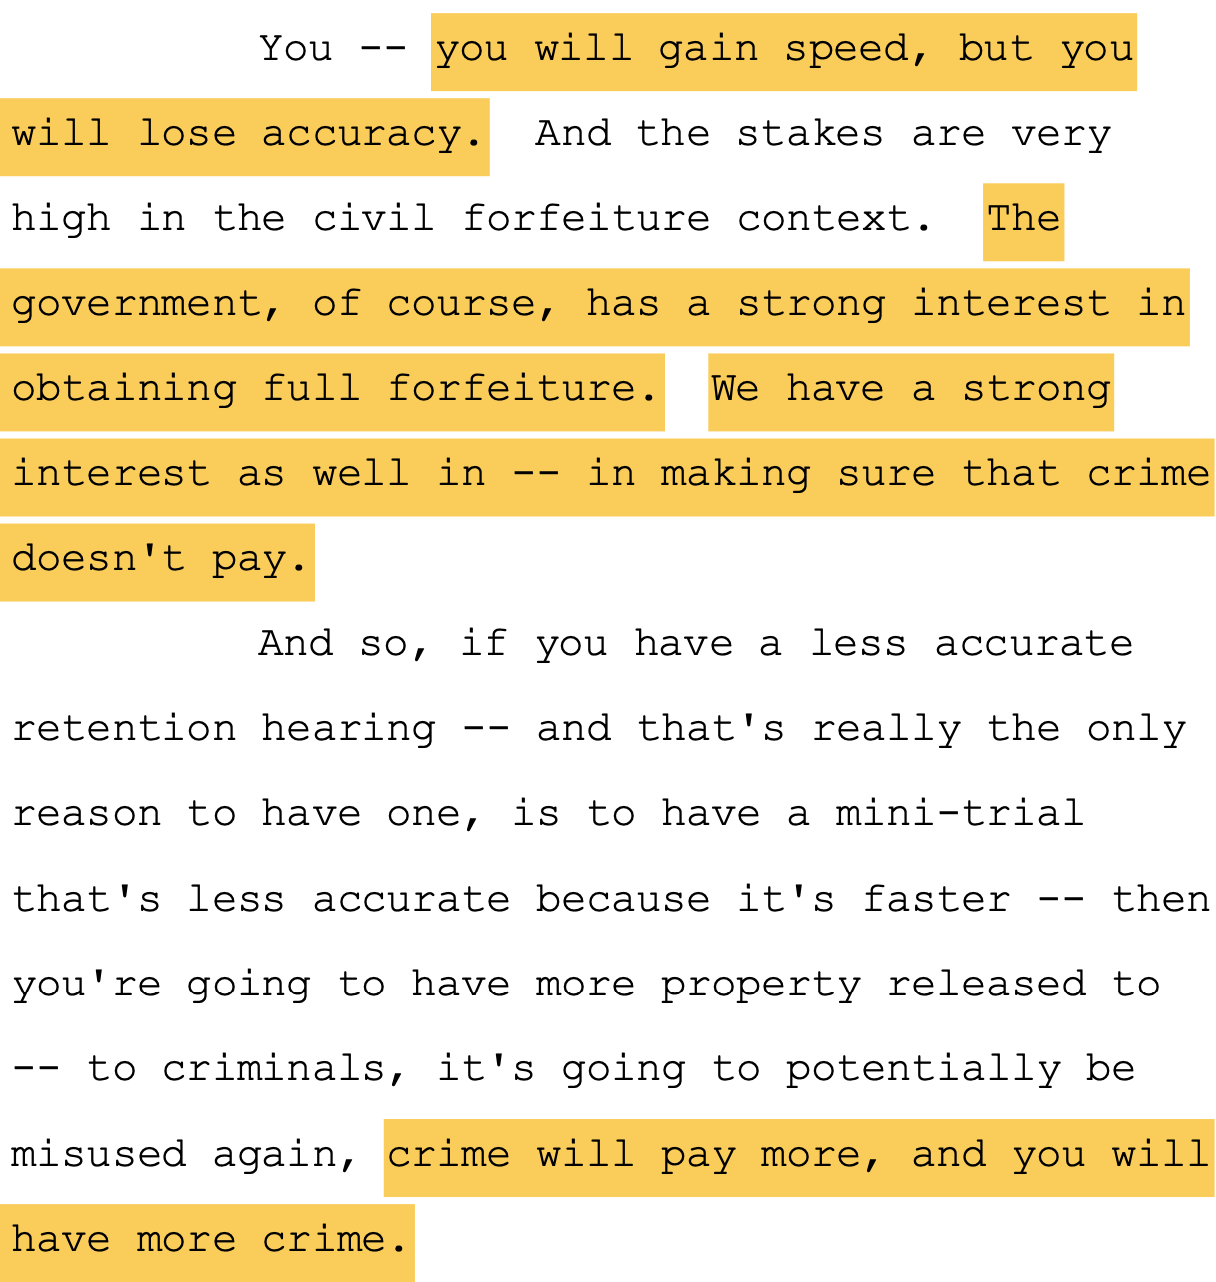 You -- you will gain speed, but you 8 will lose accuracy. And the stakes are very 9 high in the civil forfeiture context. The 10 government, of course, has a strong interest in 11 obtaining full forfeiture. We have a strong 12 interest as well in -- in making sure that crime 13 doesn't pay. 14 And so, if you have a less accurate 15 retention hearing -- and that's really the only 16 reason to have one, is to have a mini-trial 17 that's less accurate because it's faster -- then 18 you're going to have more property released to 19 -- to criminals, it's going to potentially be 20 misused again, crime will pay more, and you will 21 have more crime.